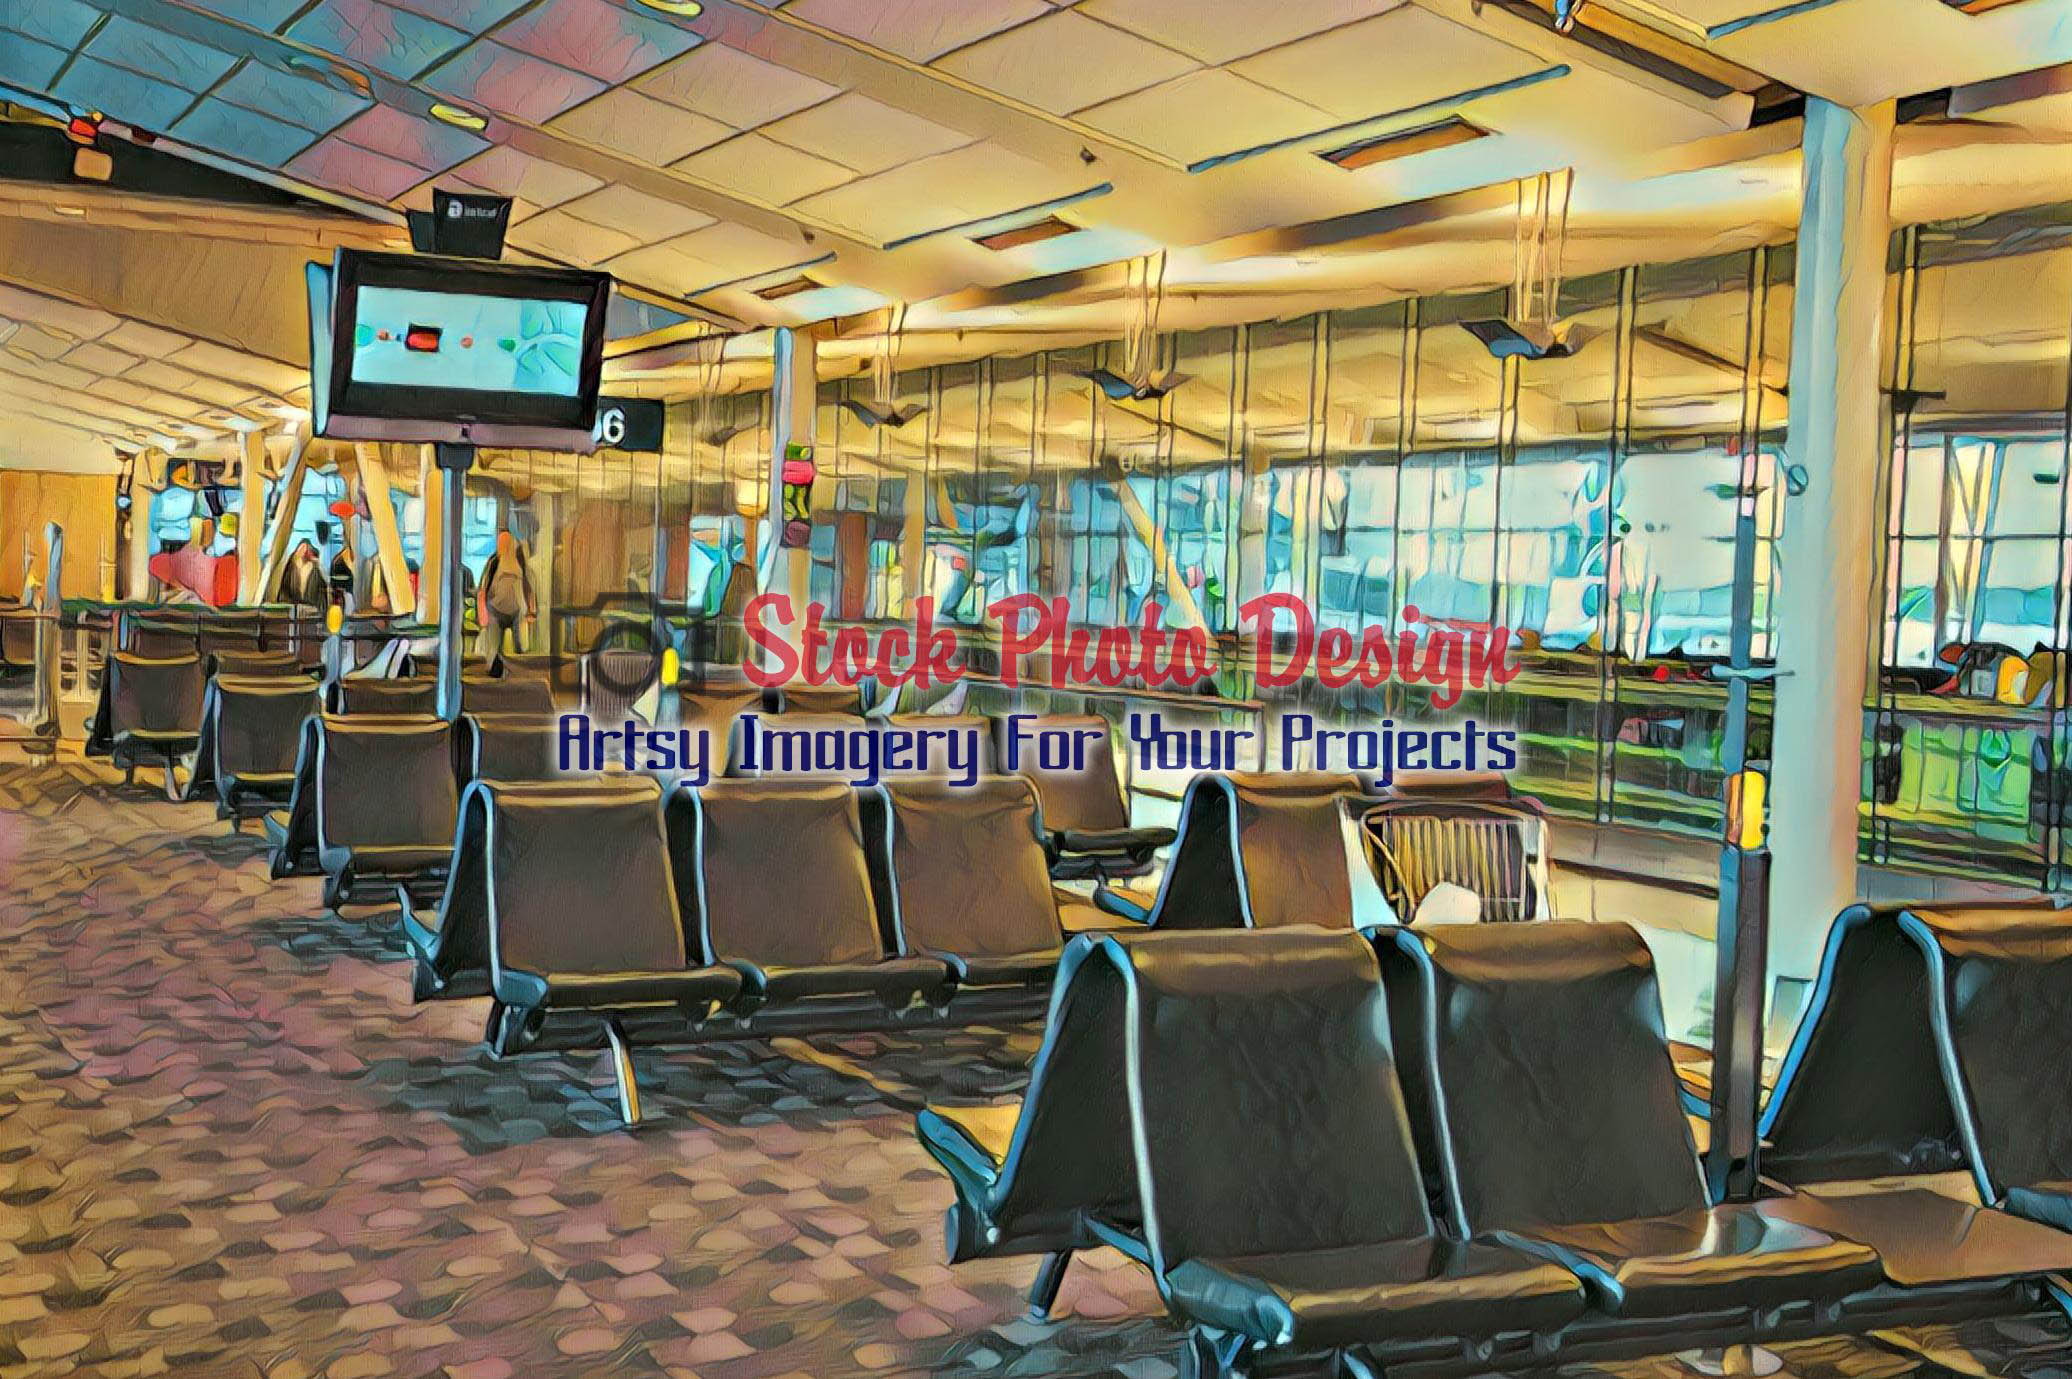 Airport Lobby 3 - Dimensions: 2072 by 1379 pixels